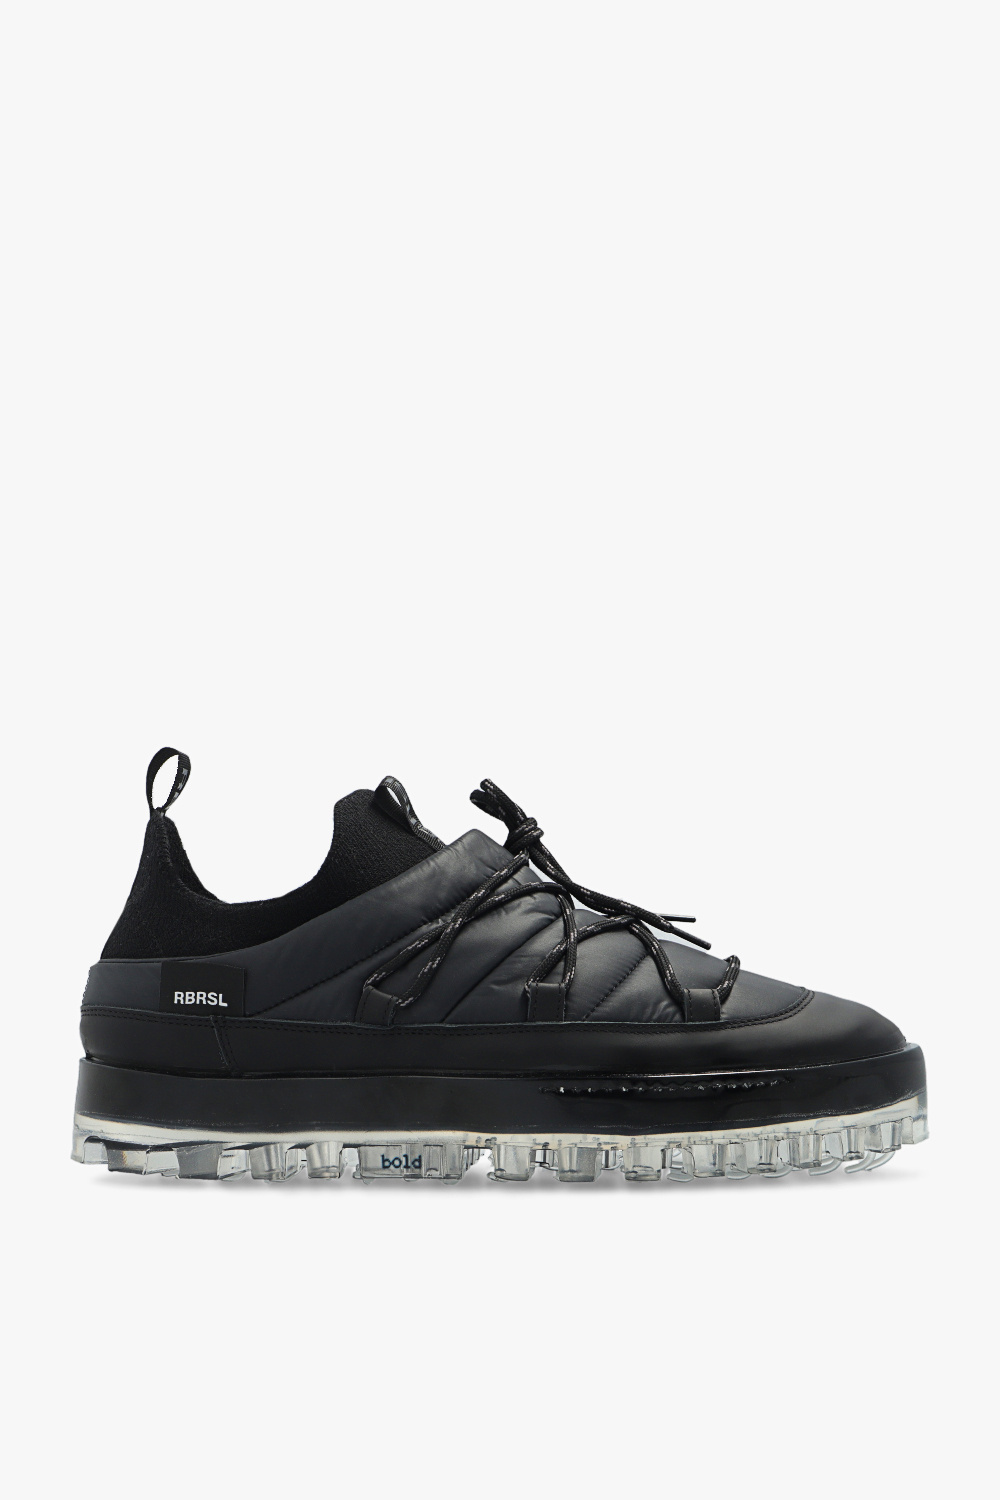 RBRSL Lace-up sneakers